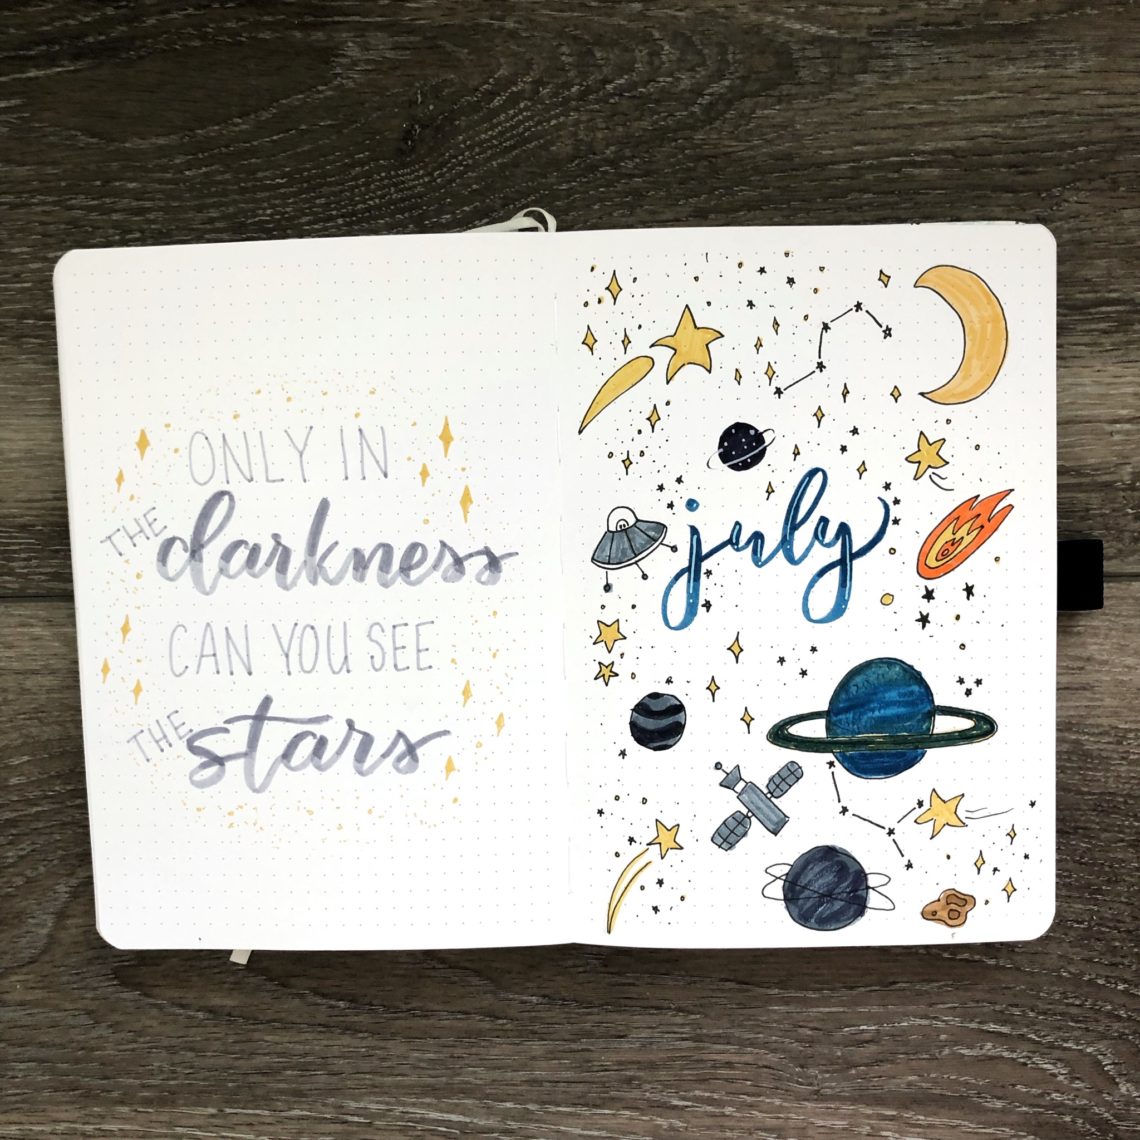 July 2019 Bullet Journal - Rae's Daily Page